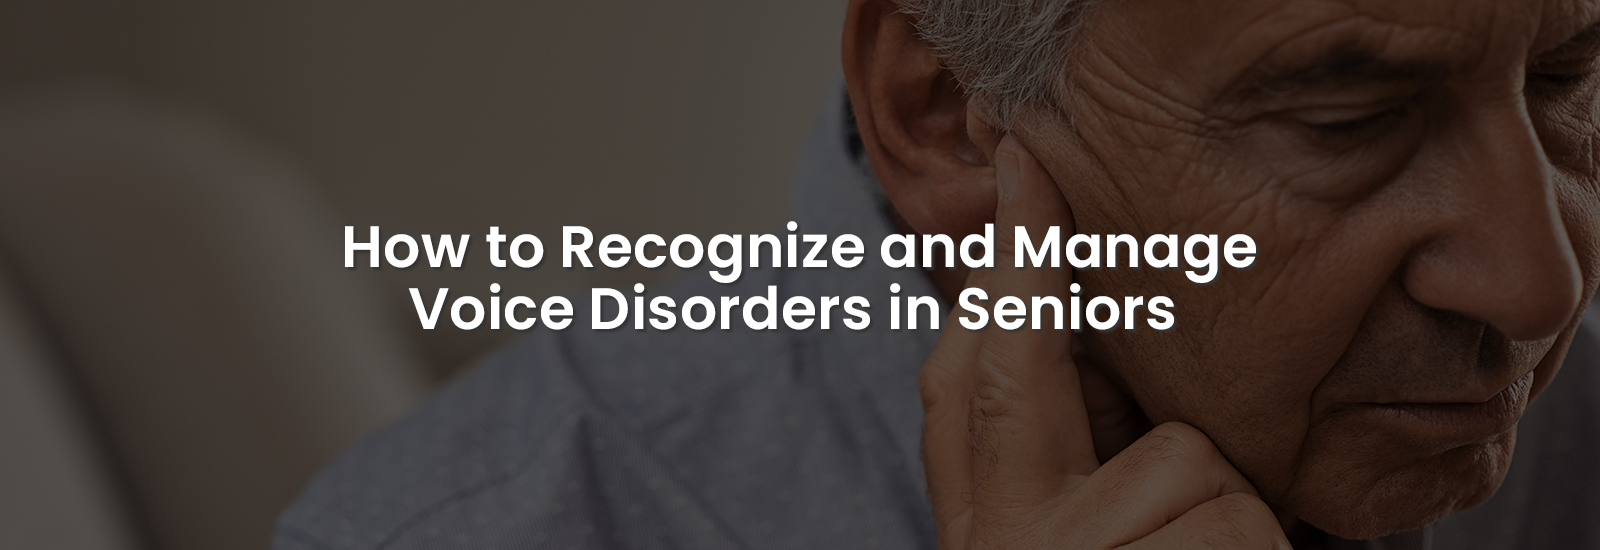 How to Recognize and Manage Voice Disorders in Seniors | Banner Image